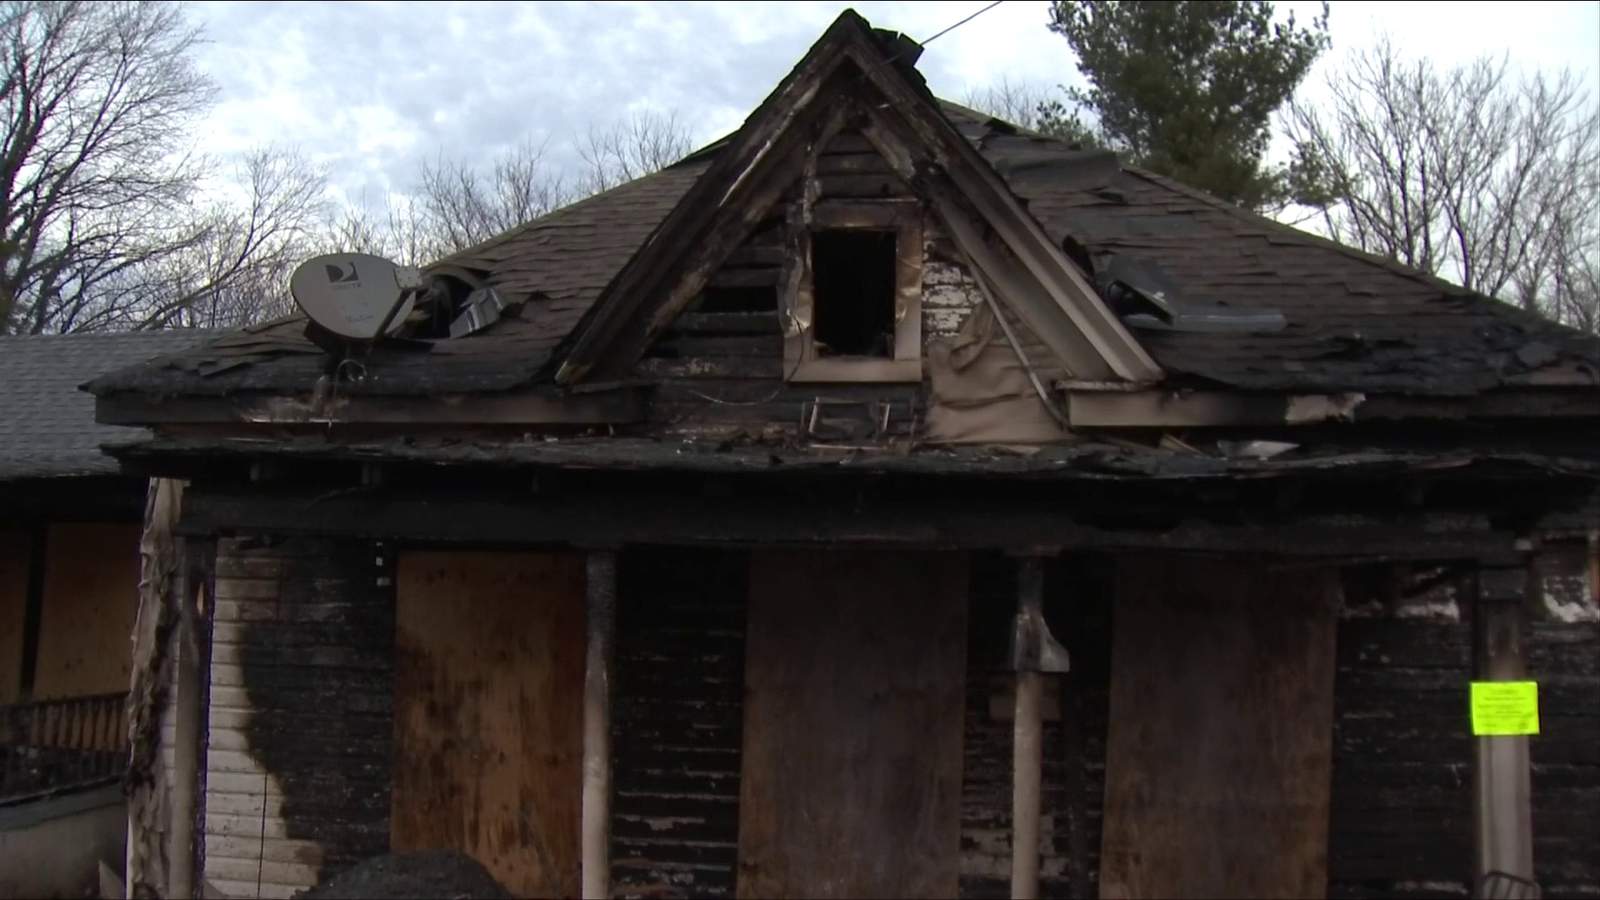 “I saw black smoke everywhere”: Roanoke mother loses everything in house fire